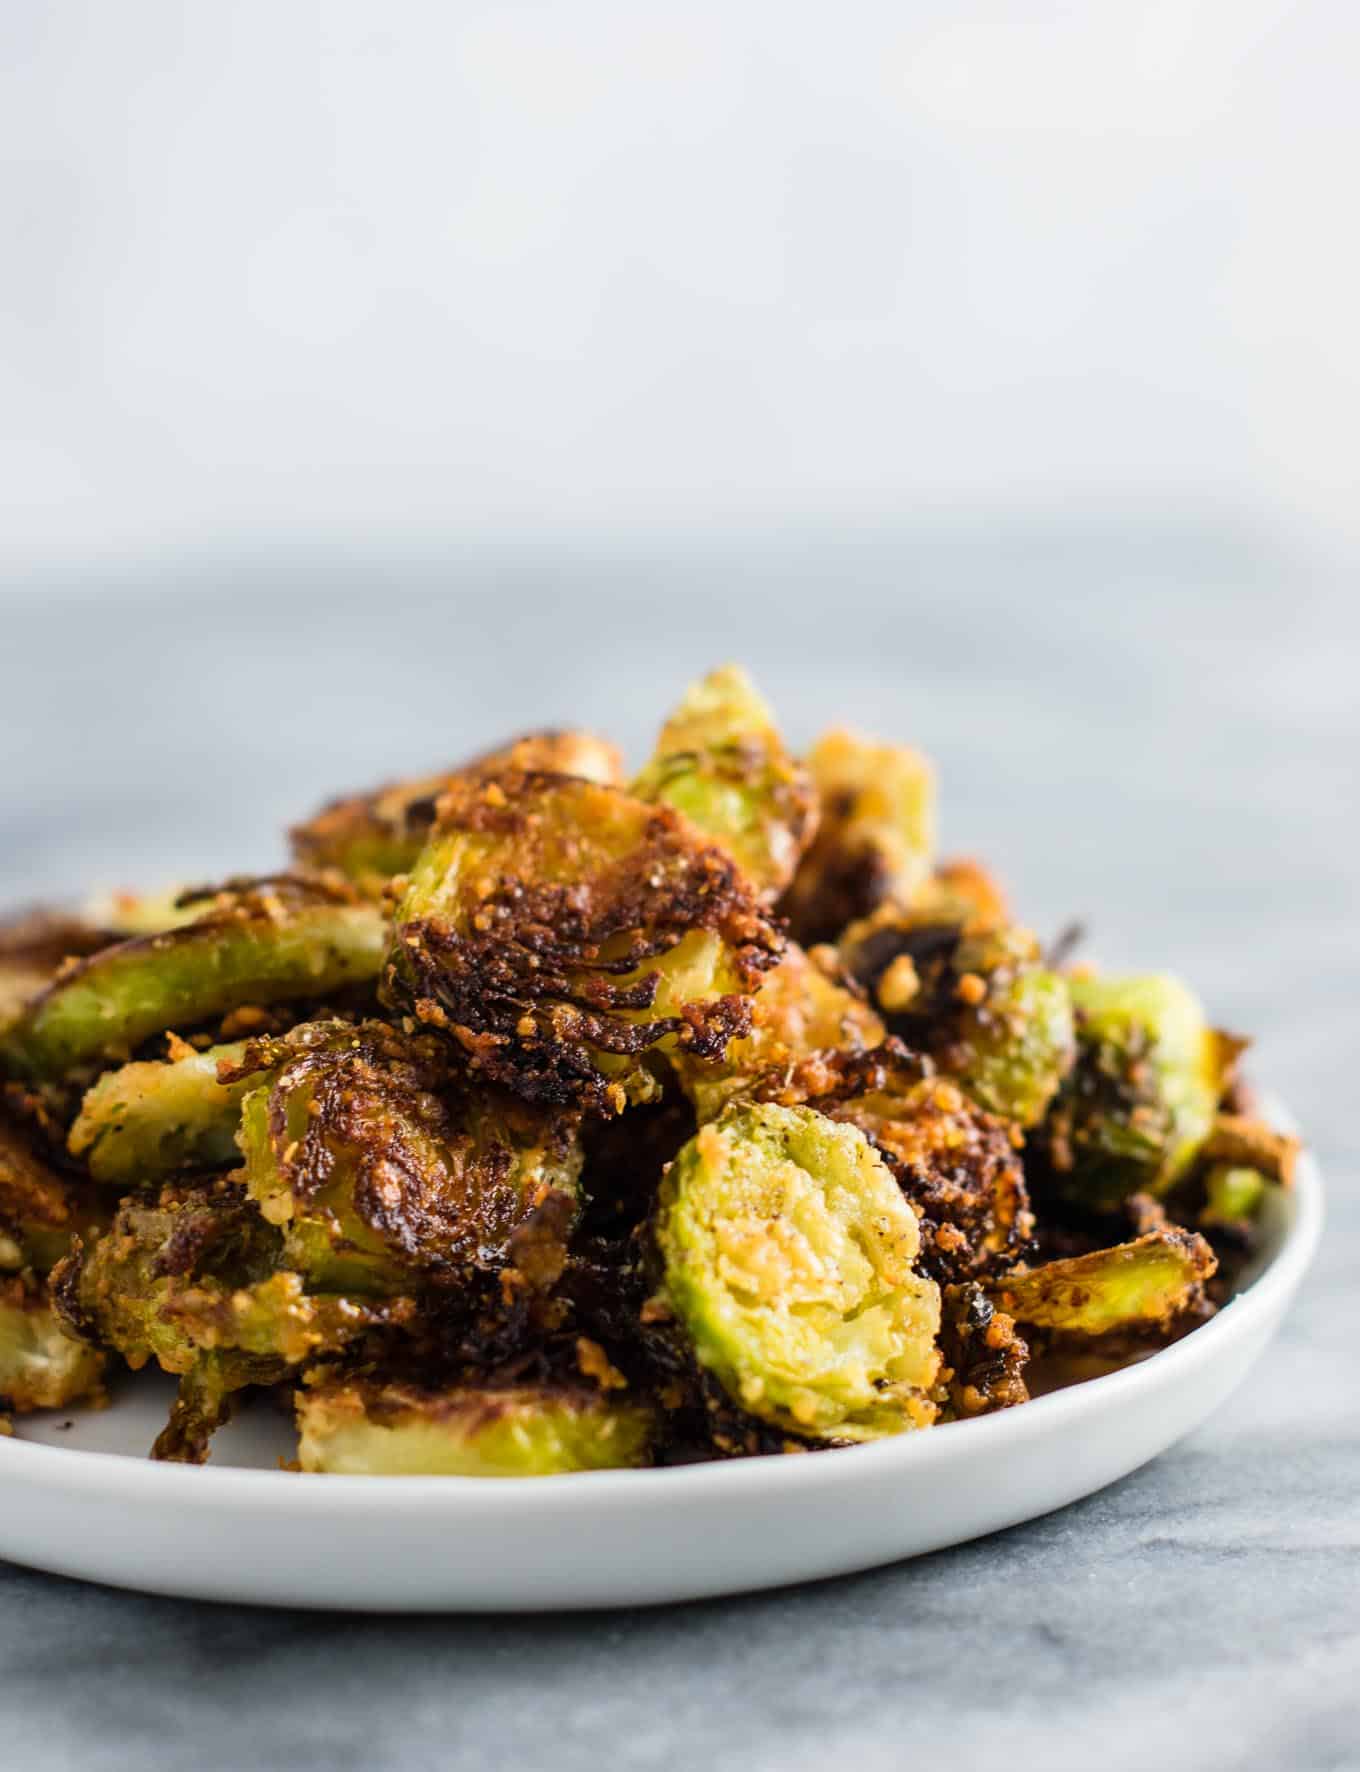 Roasted Brussel sprout chips - these are so good I could eat the whole pan myself! #brusselsprouts #brusselsproutchips #dinner #sidedish #vegetarian